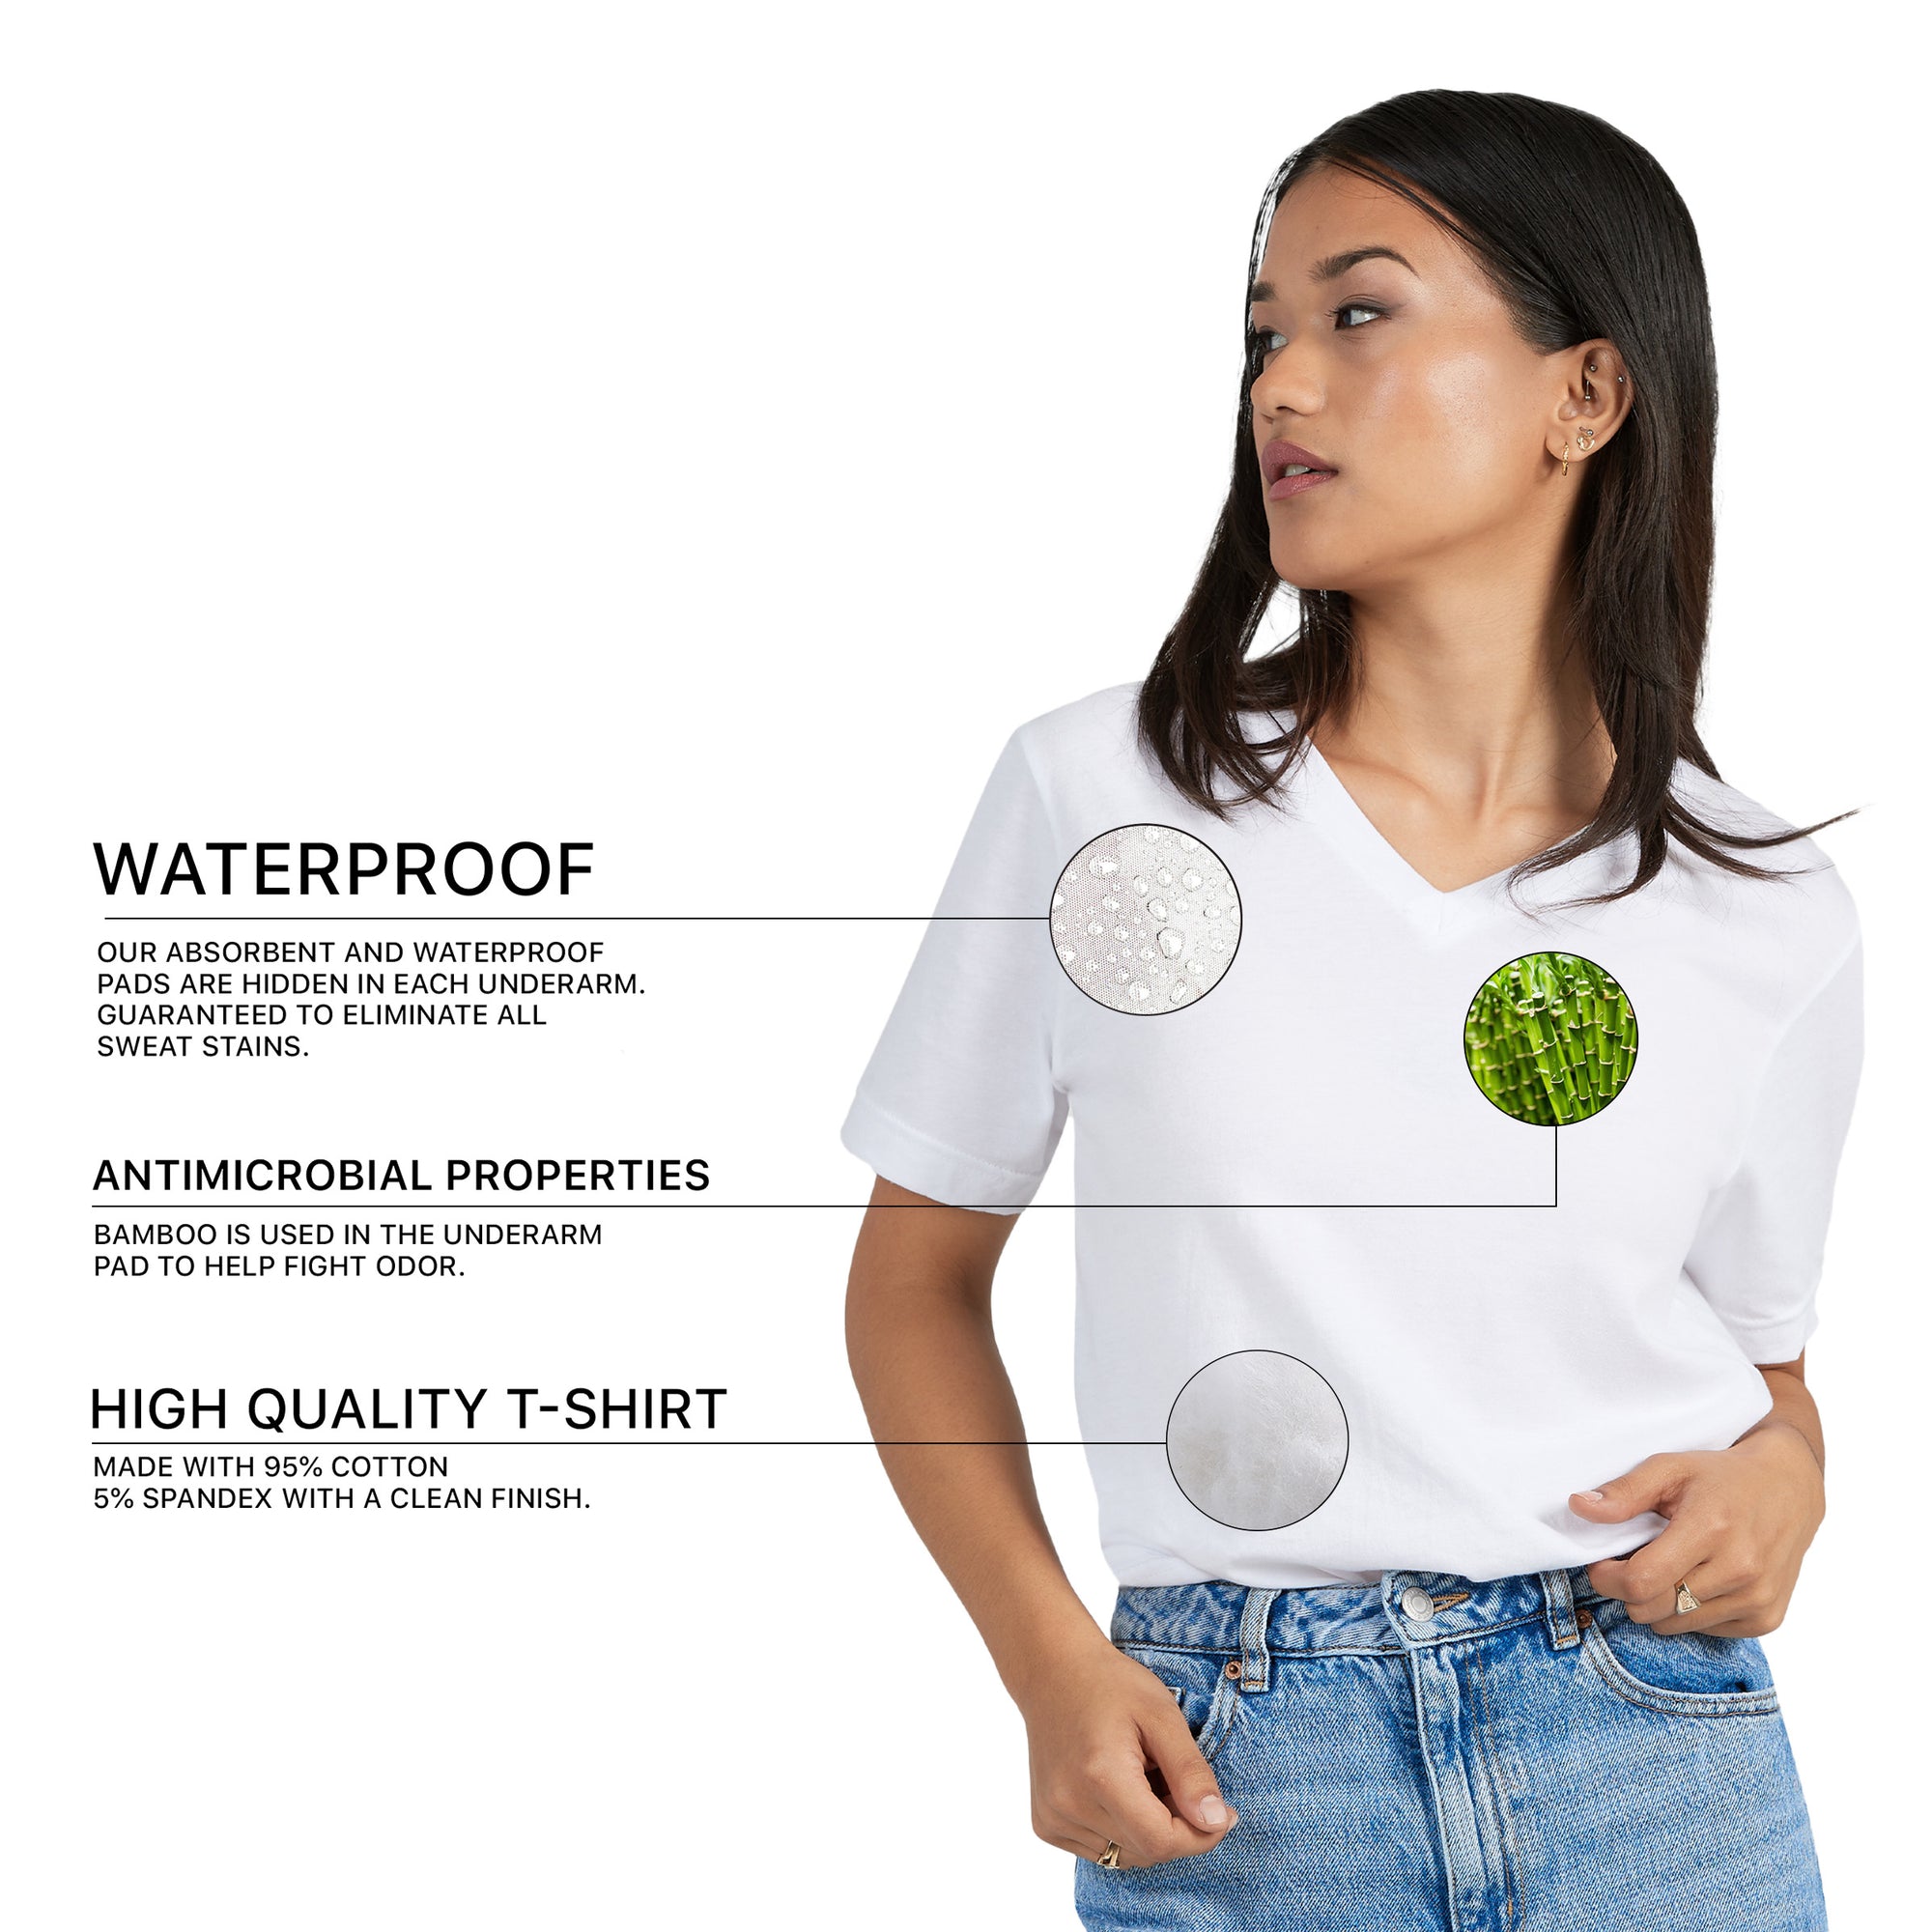 Sweat absorbing shirts contain hidden underarm pads to eliminate armpit stains. | Social Citizen